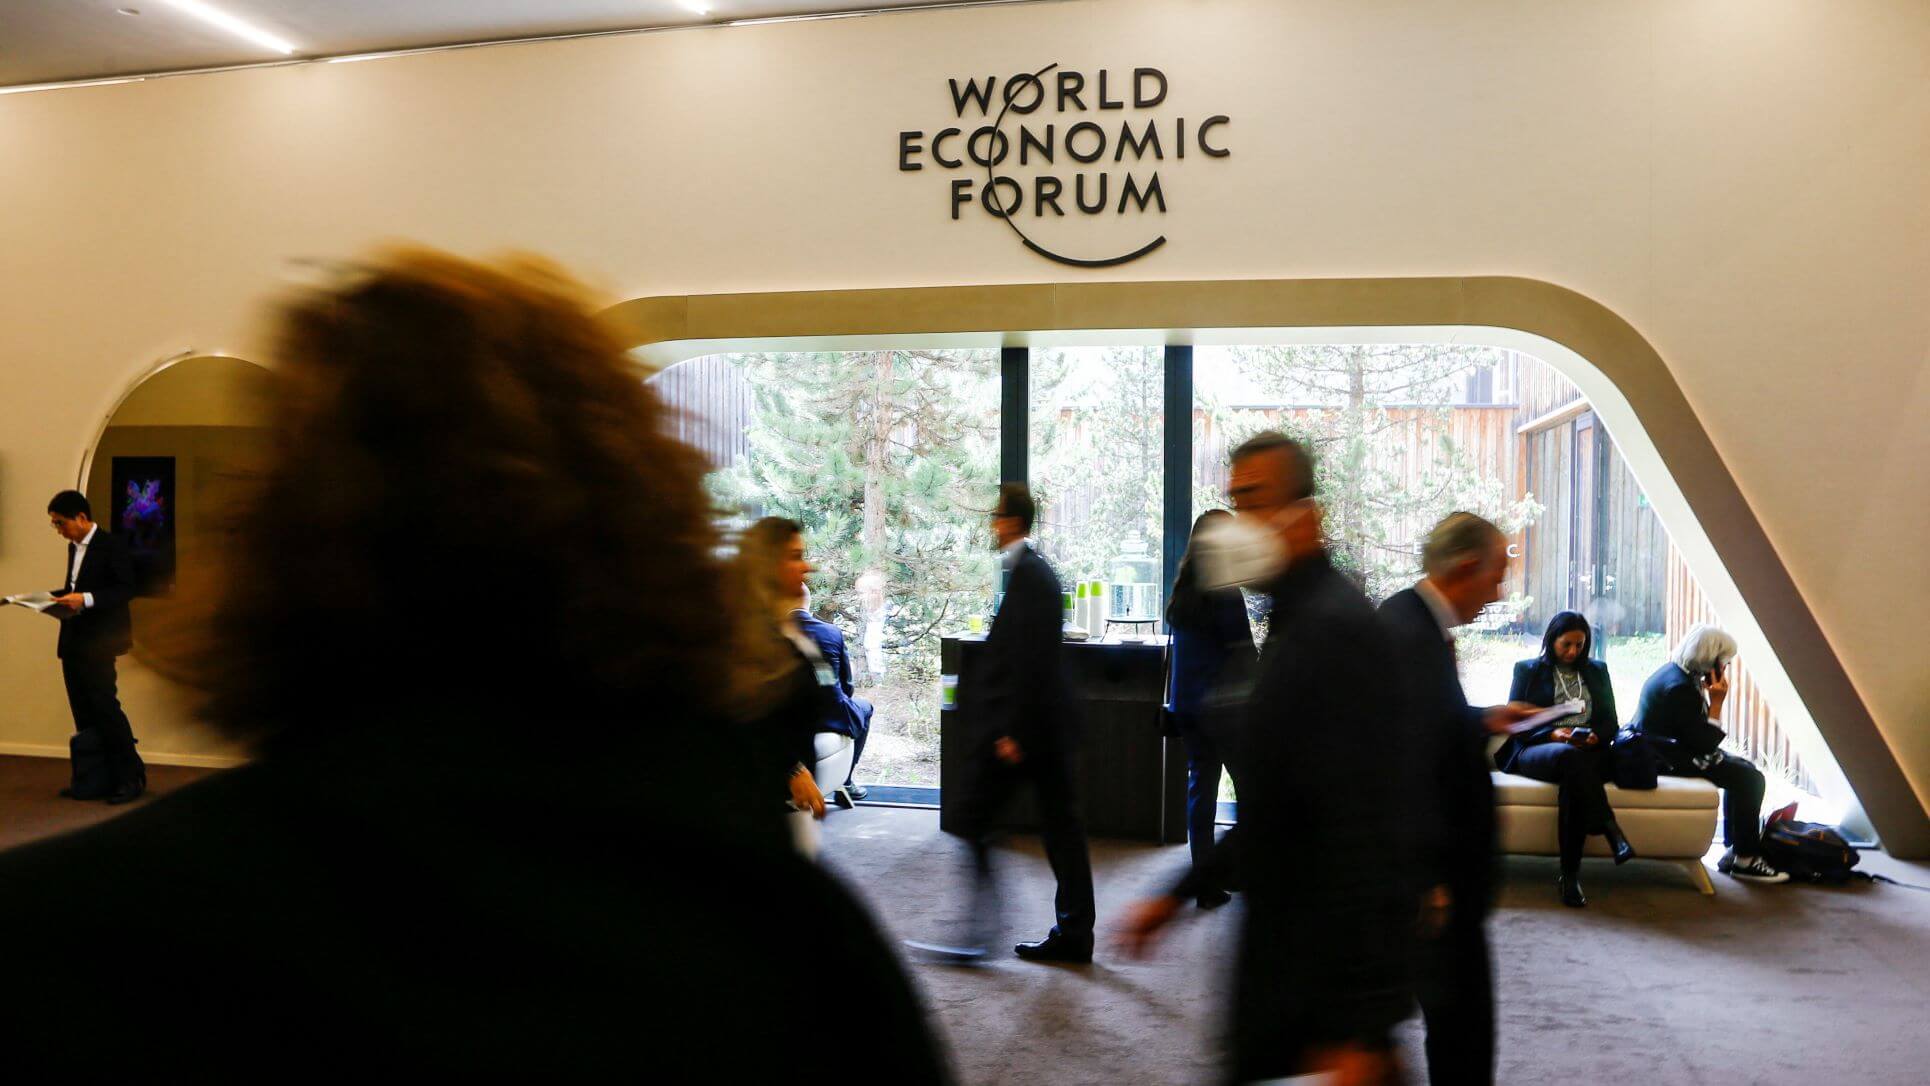 Economic Storm Looming, Business And Government Leaders Warn In Davos